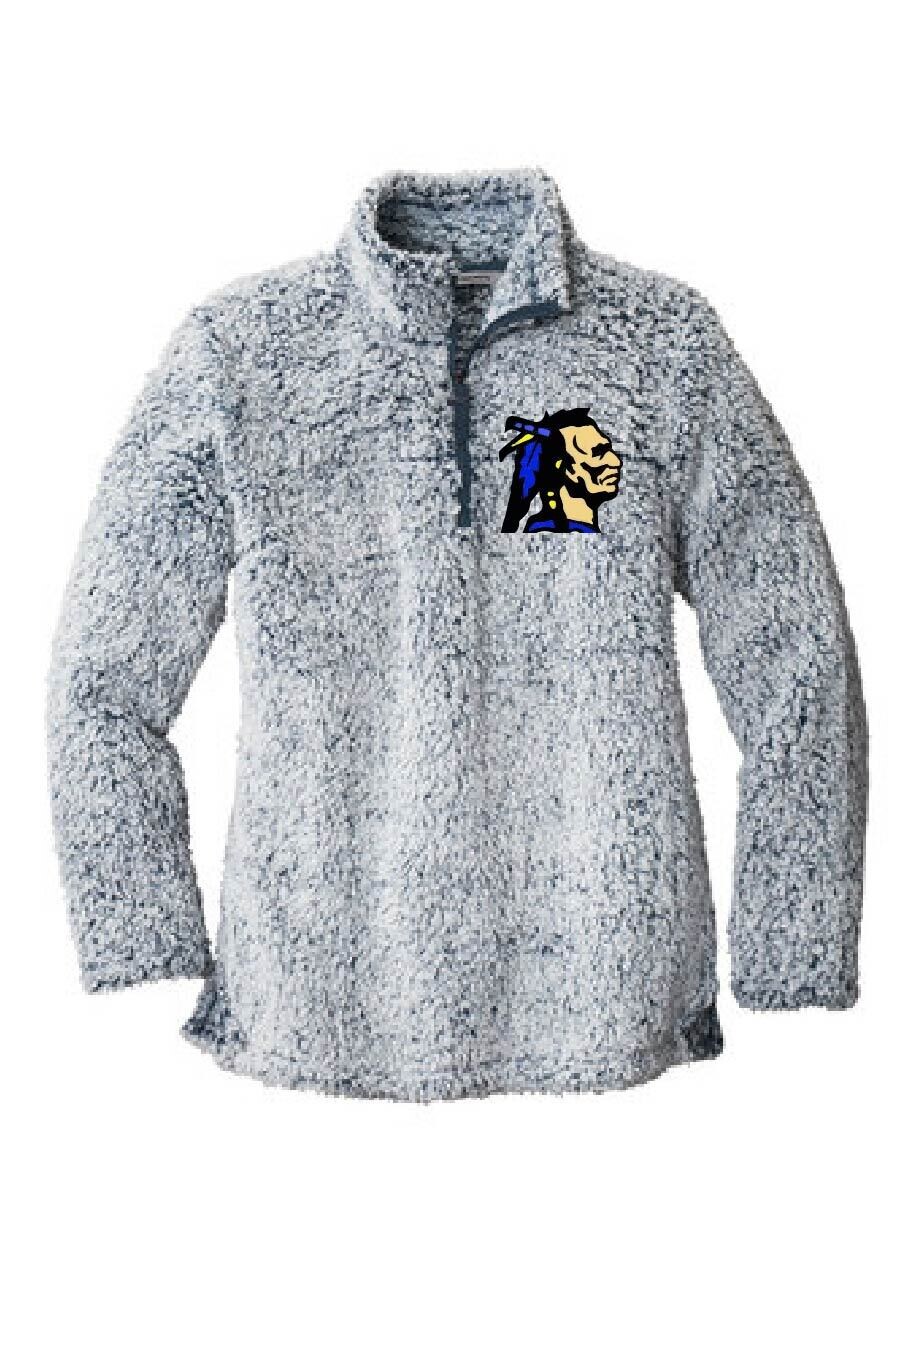 LADIES EMBROIDERED SHERPA